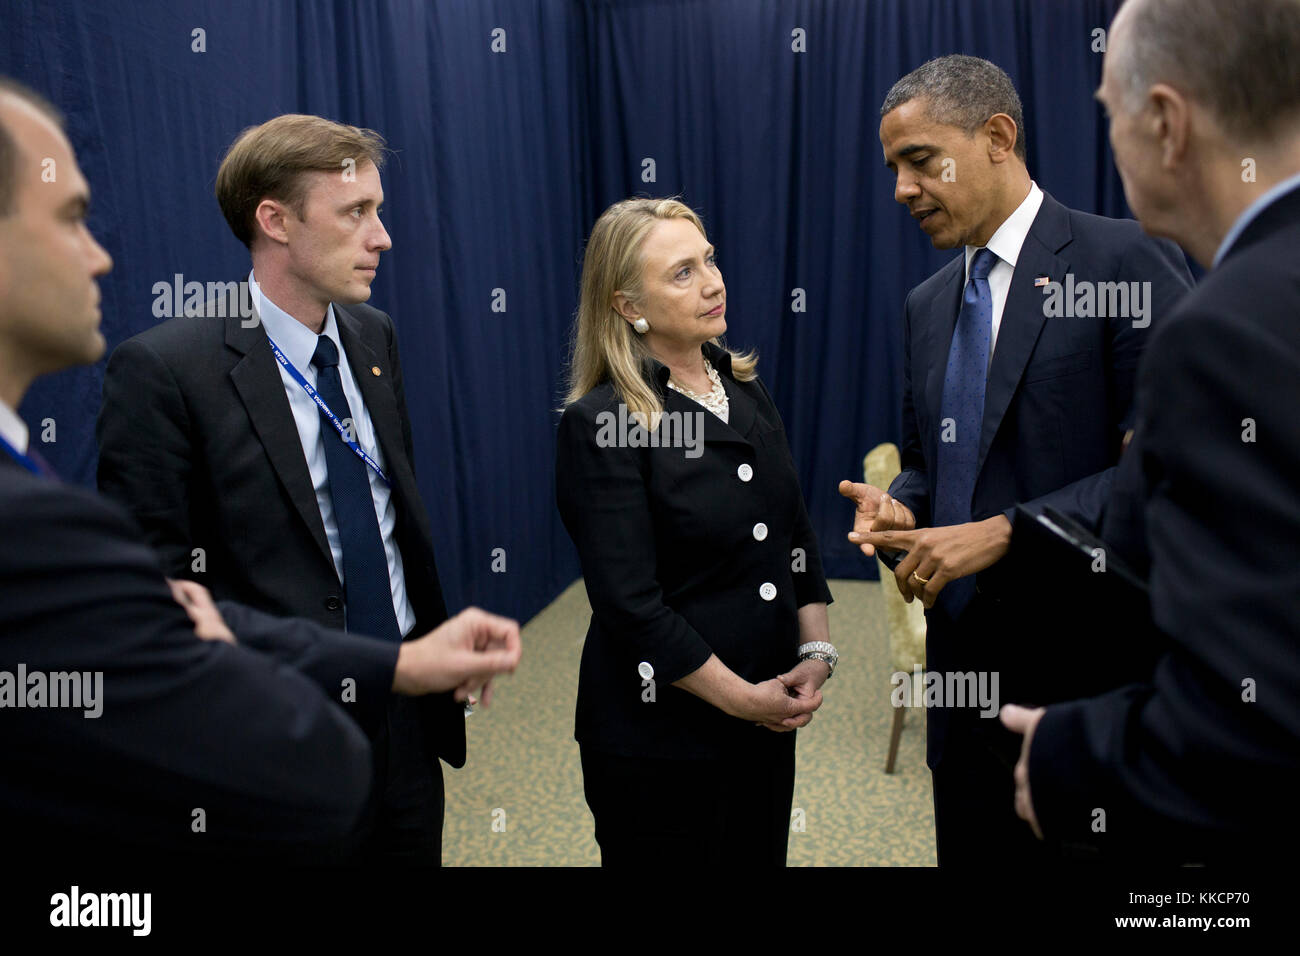 President Barack Obama talks with Secretary of State Hillary Rodham Clinton about his decision to send her to the Middle East while attending the U.S.-ASEAN Summit in Phnom Penh, Cambodia, Nov. 20, 2012. From left are: Ben Rhodes, Deputy National Security Advisor for Strategic Communications; Jake Sullivan, Deputy Chief of Staff to the Secretary of State; and National Security Advisor Tom Donilon. (Official White House Photo by Pete Souza)  This official White House photograph is being made available only for publication by news organizations and/or for personal use printing by the subject(s)  Stock Photo